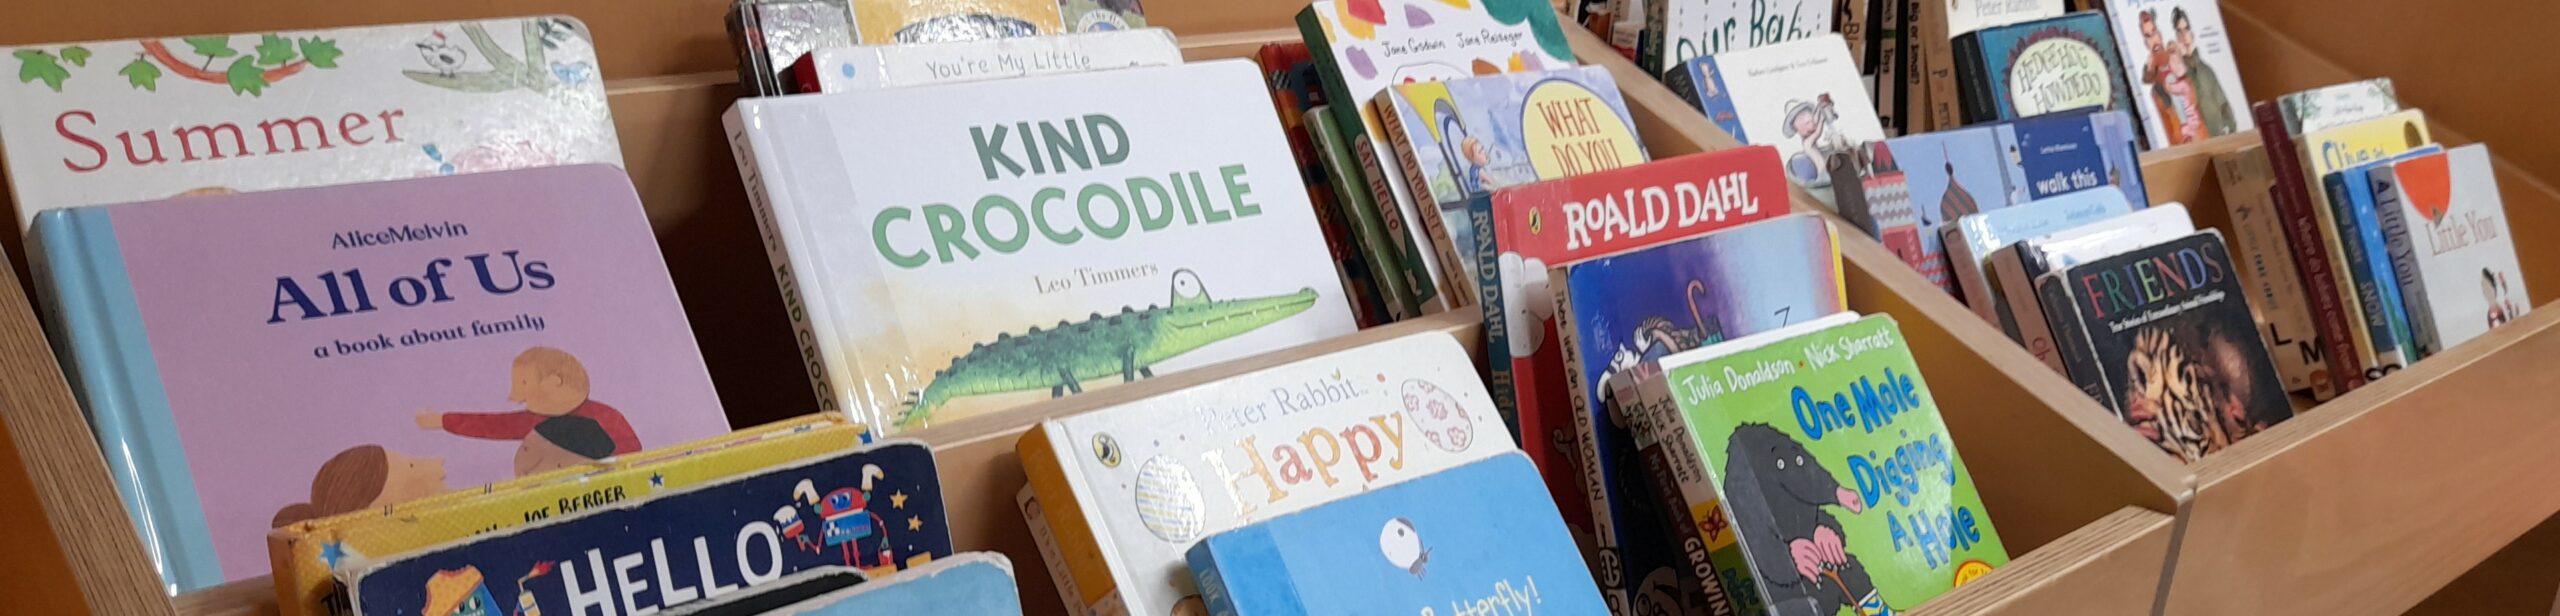 Board books in face-out wooden shelving